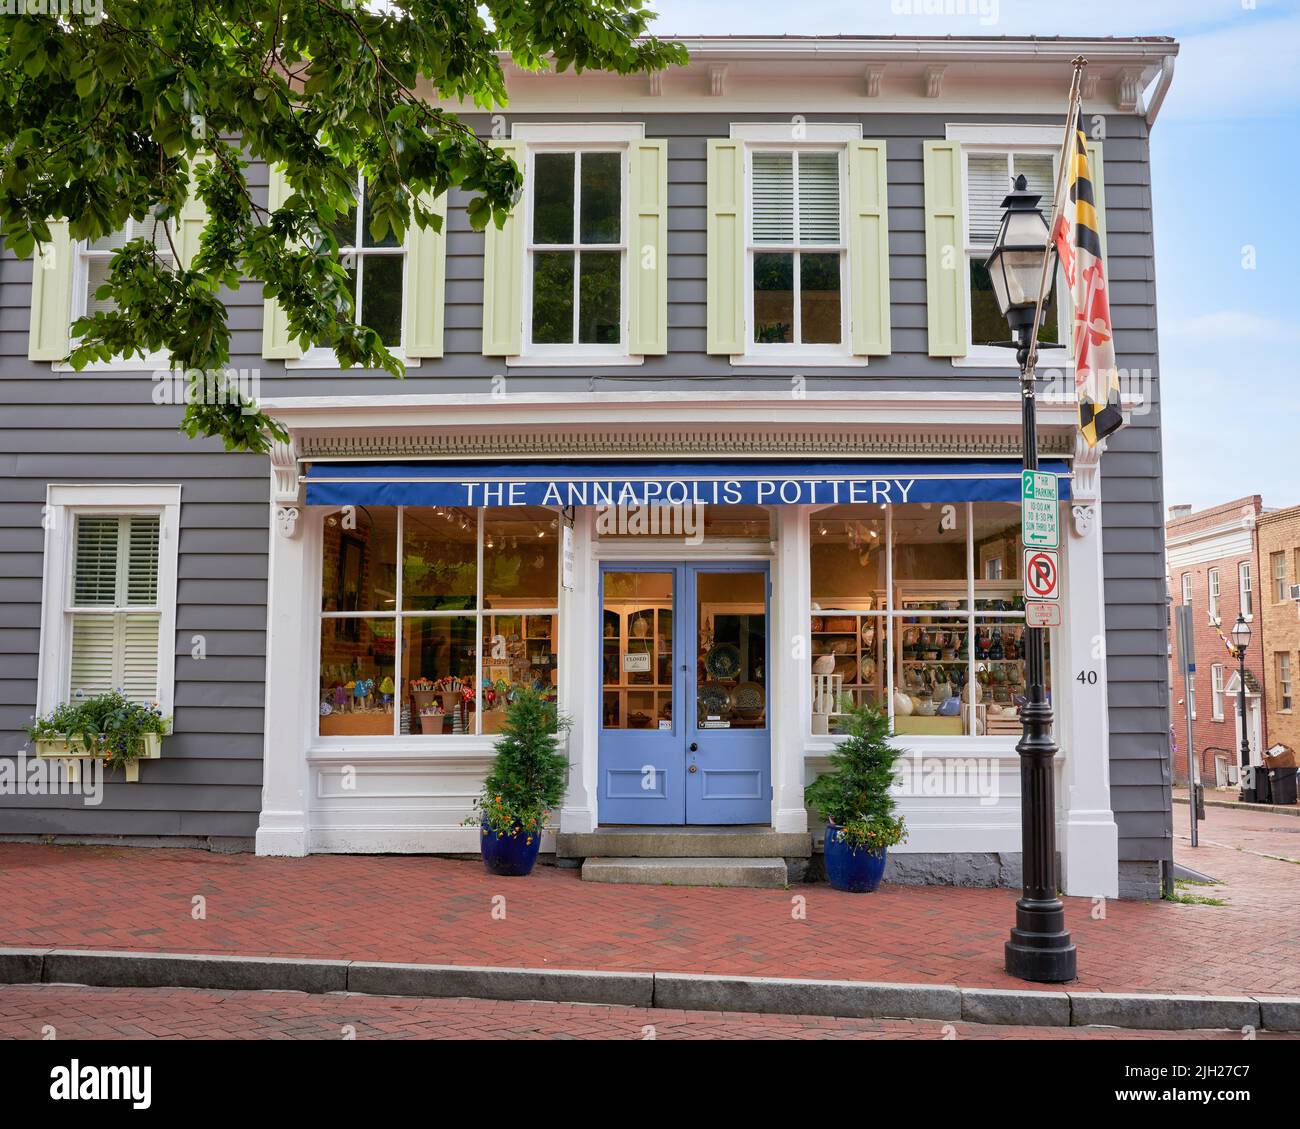 The Annapolis Pottery in historic downtown Annapolis, Maryland, USA. Local business selling pottery and handcrafted goods. Stock Photo